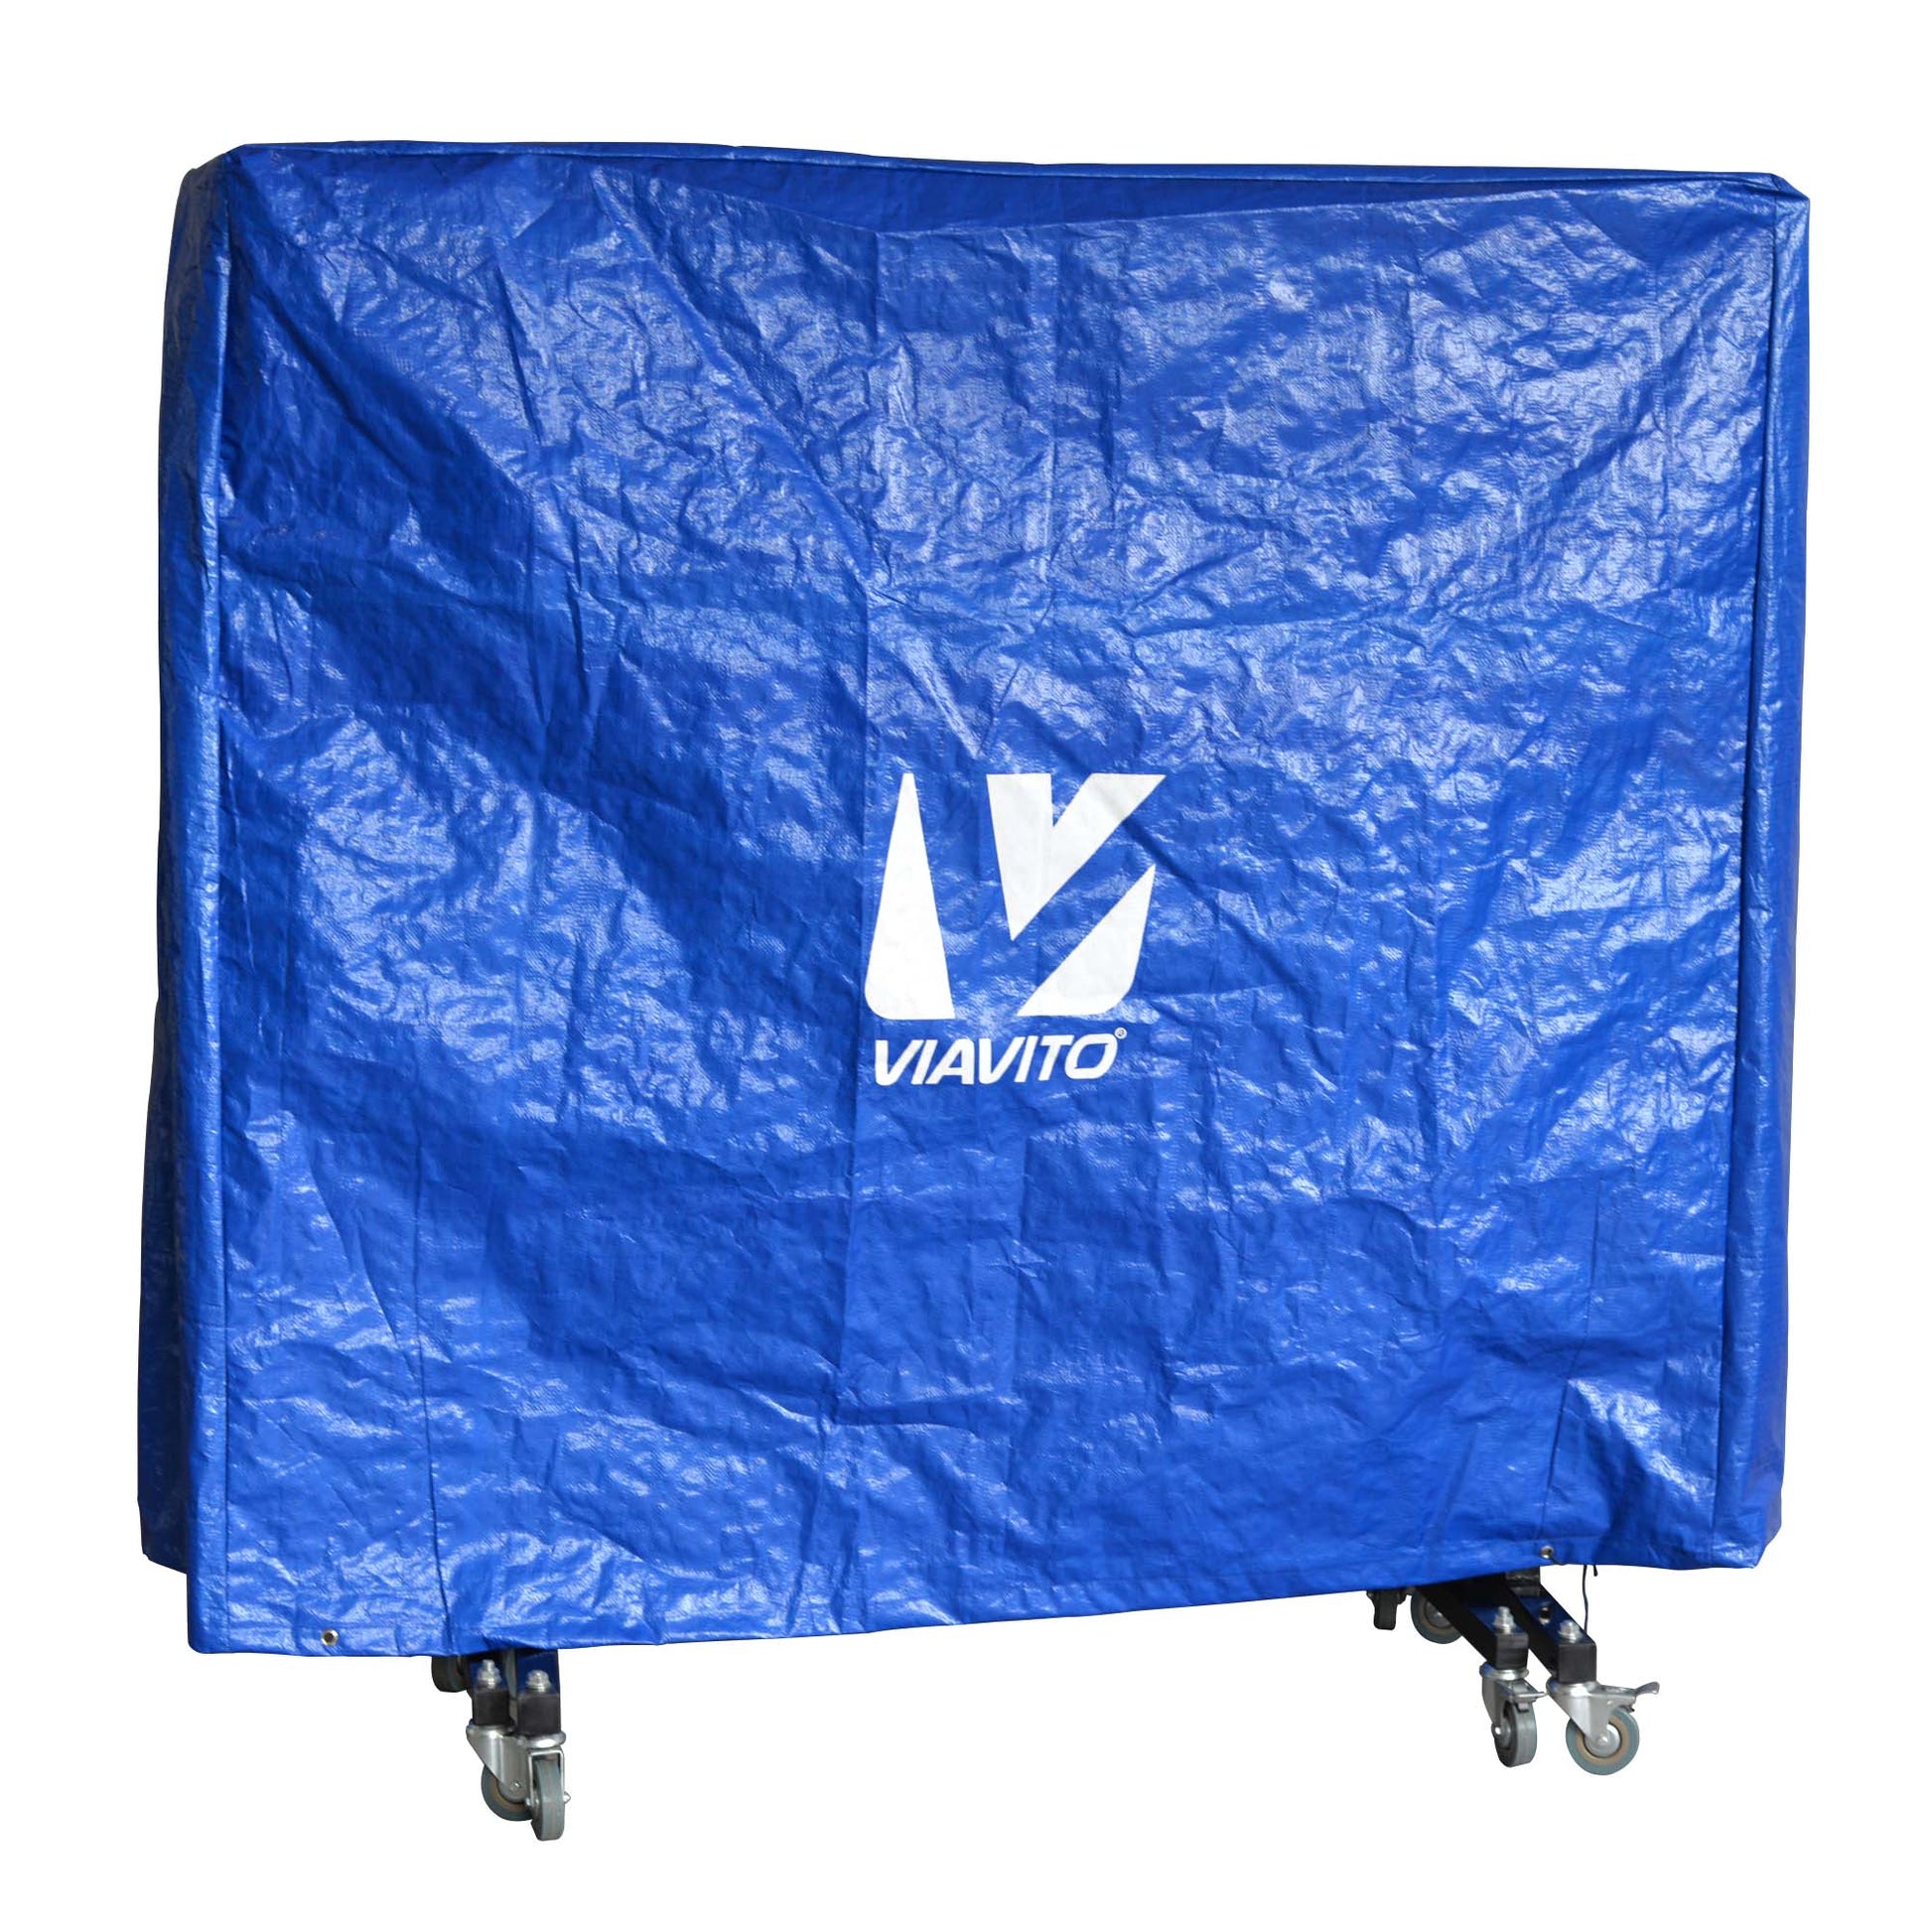 |Viavito Protactic Table Tennis Table Cover|